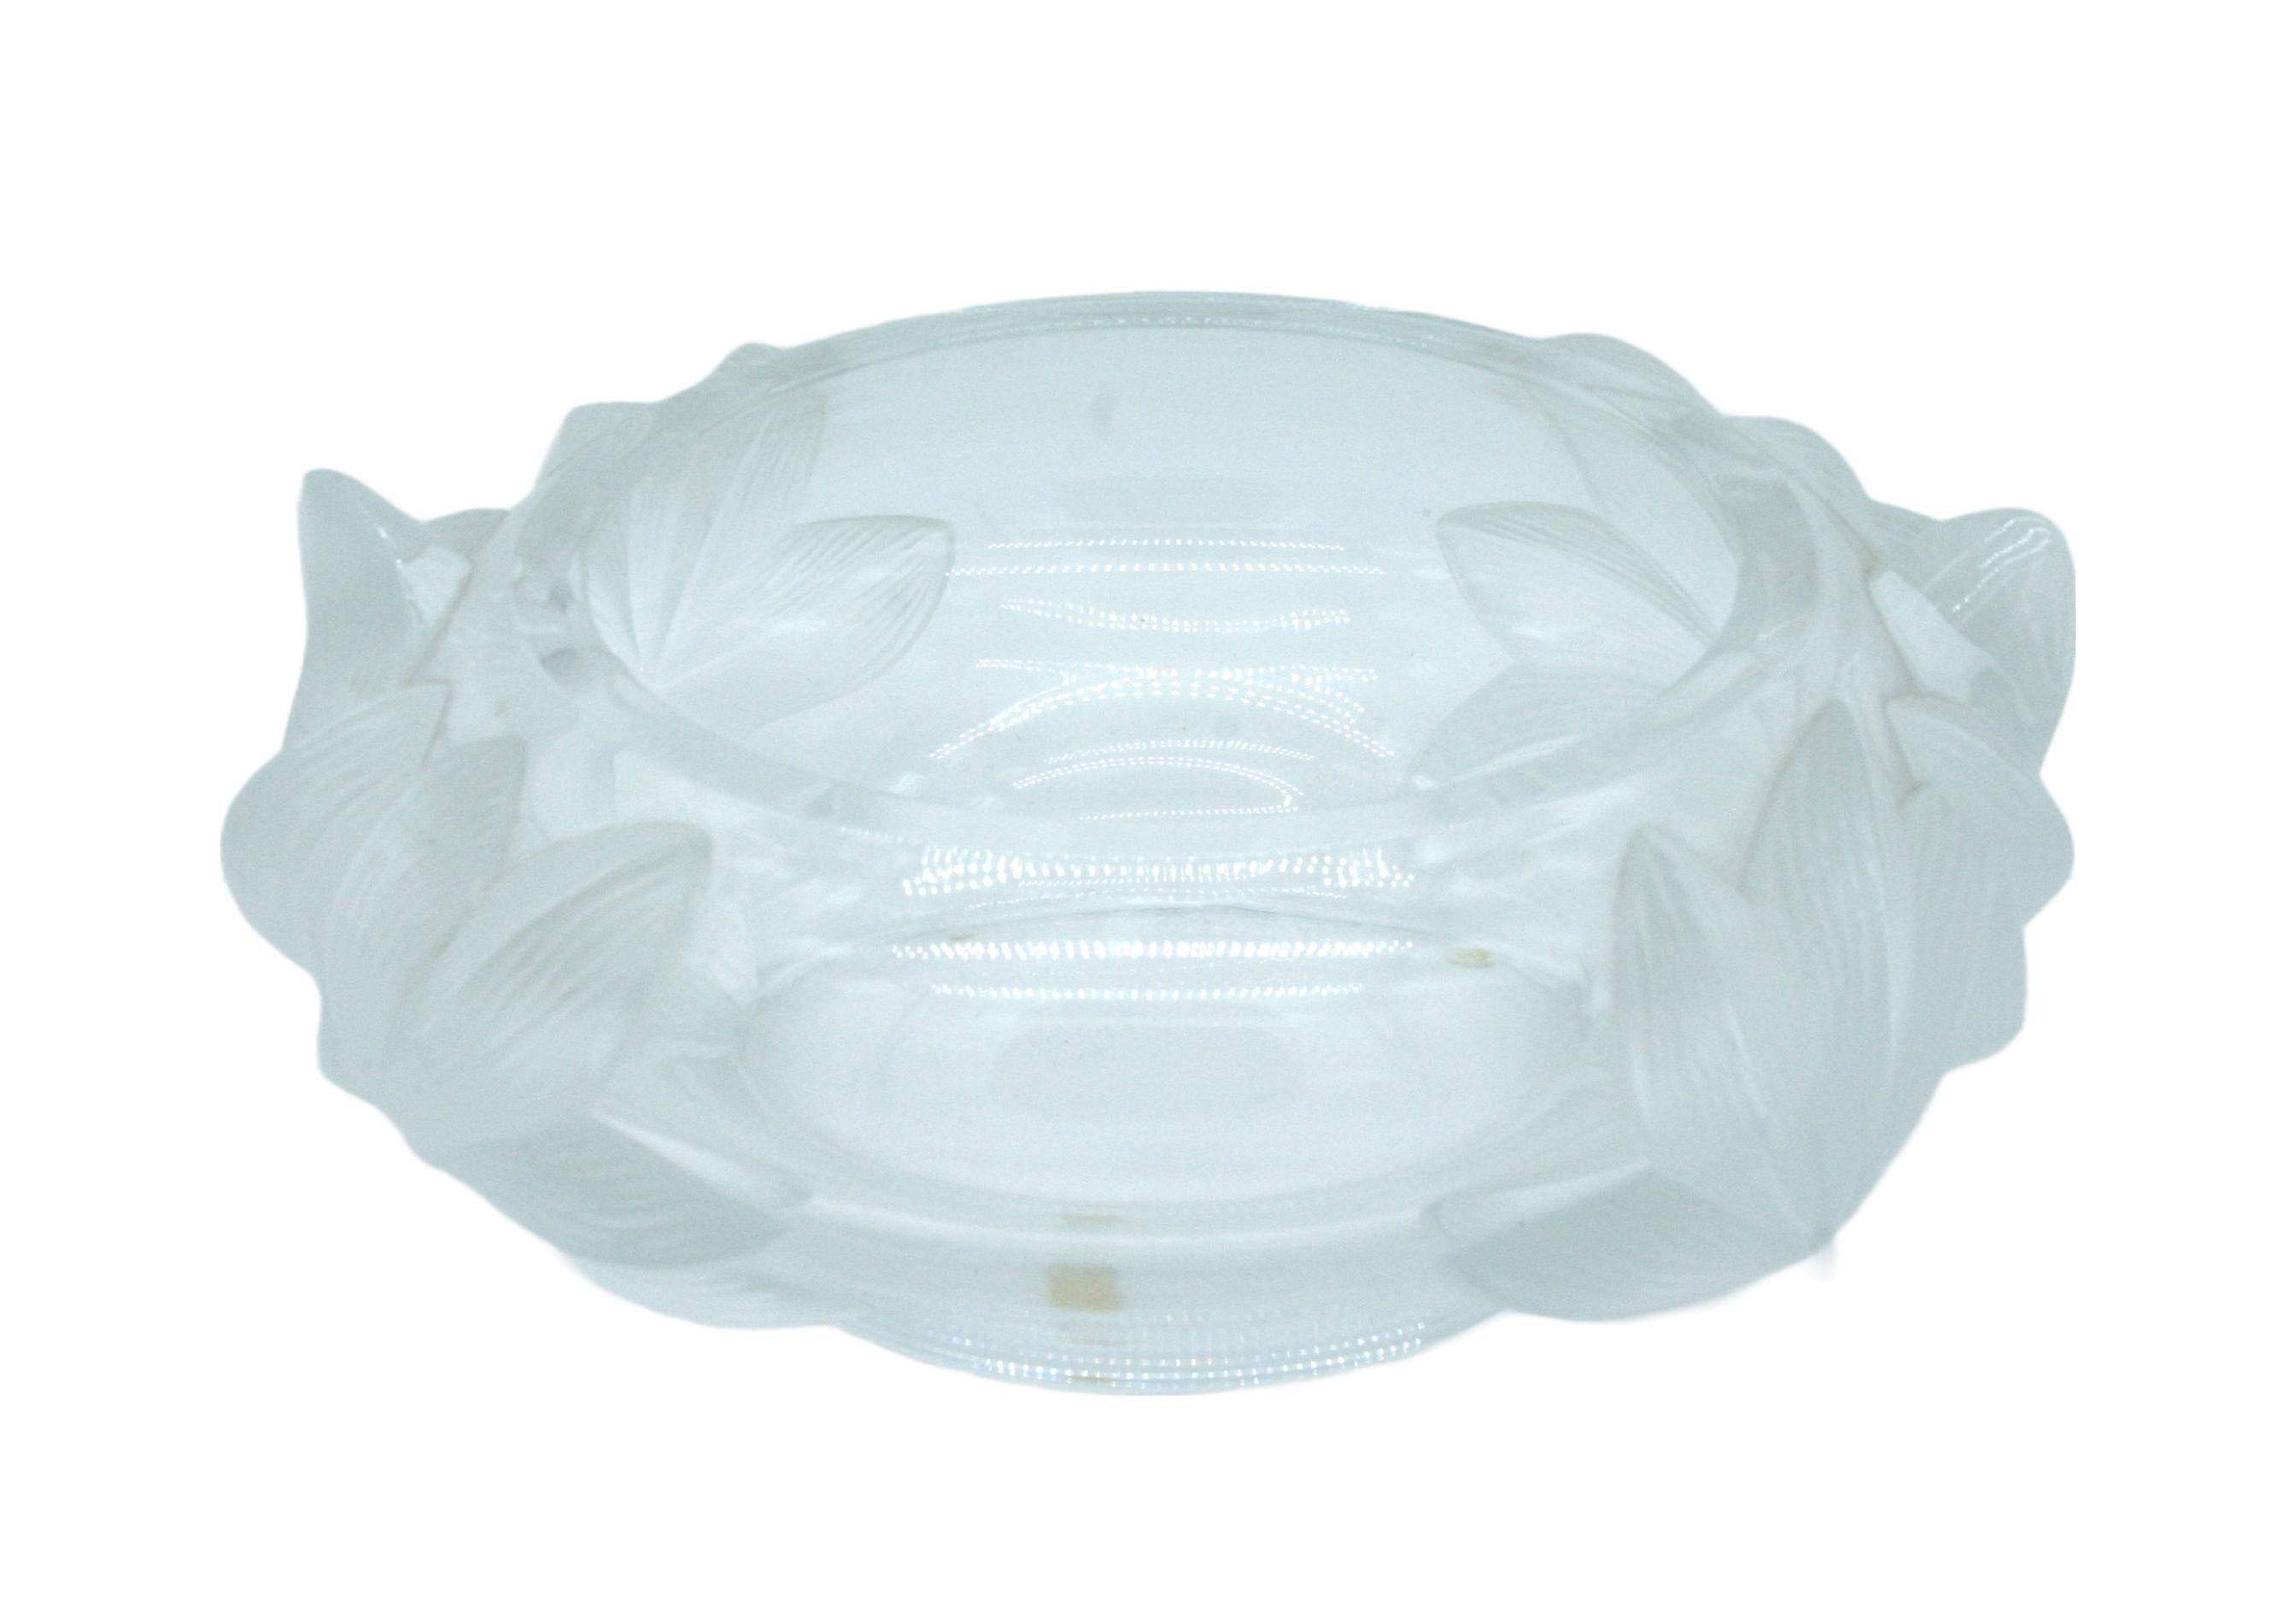 Beautifully crafted Lalique decorative centerpiece bowl with exterior design details. The piece is in great condition. Minor shelves wear. Maker's mark underneath. The centerpiece bowl measures about 11 inches diameter x 4 1/2 inches high.
   